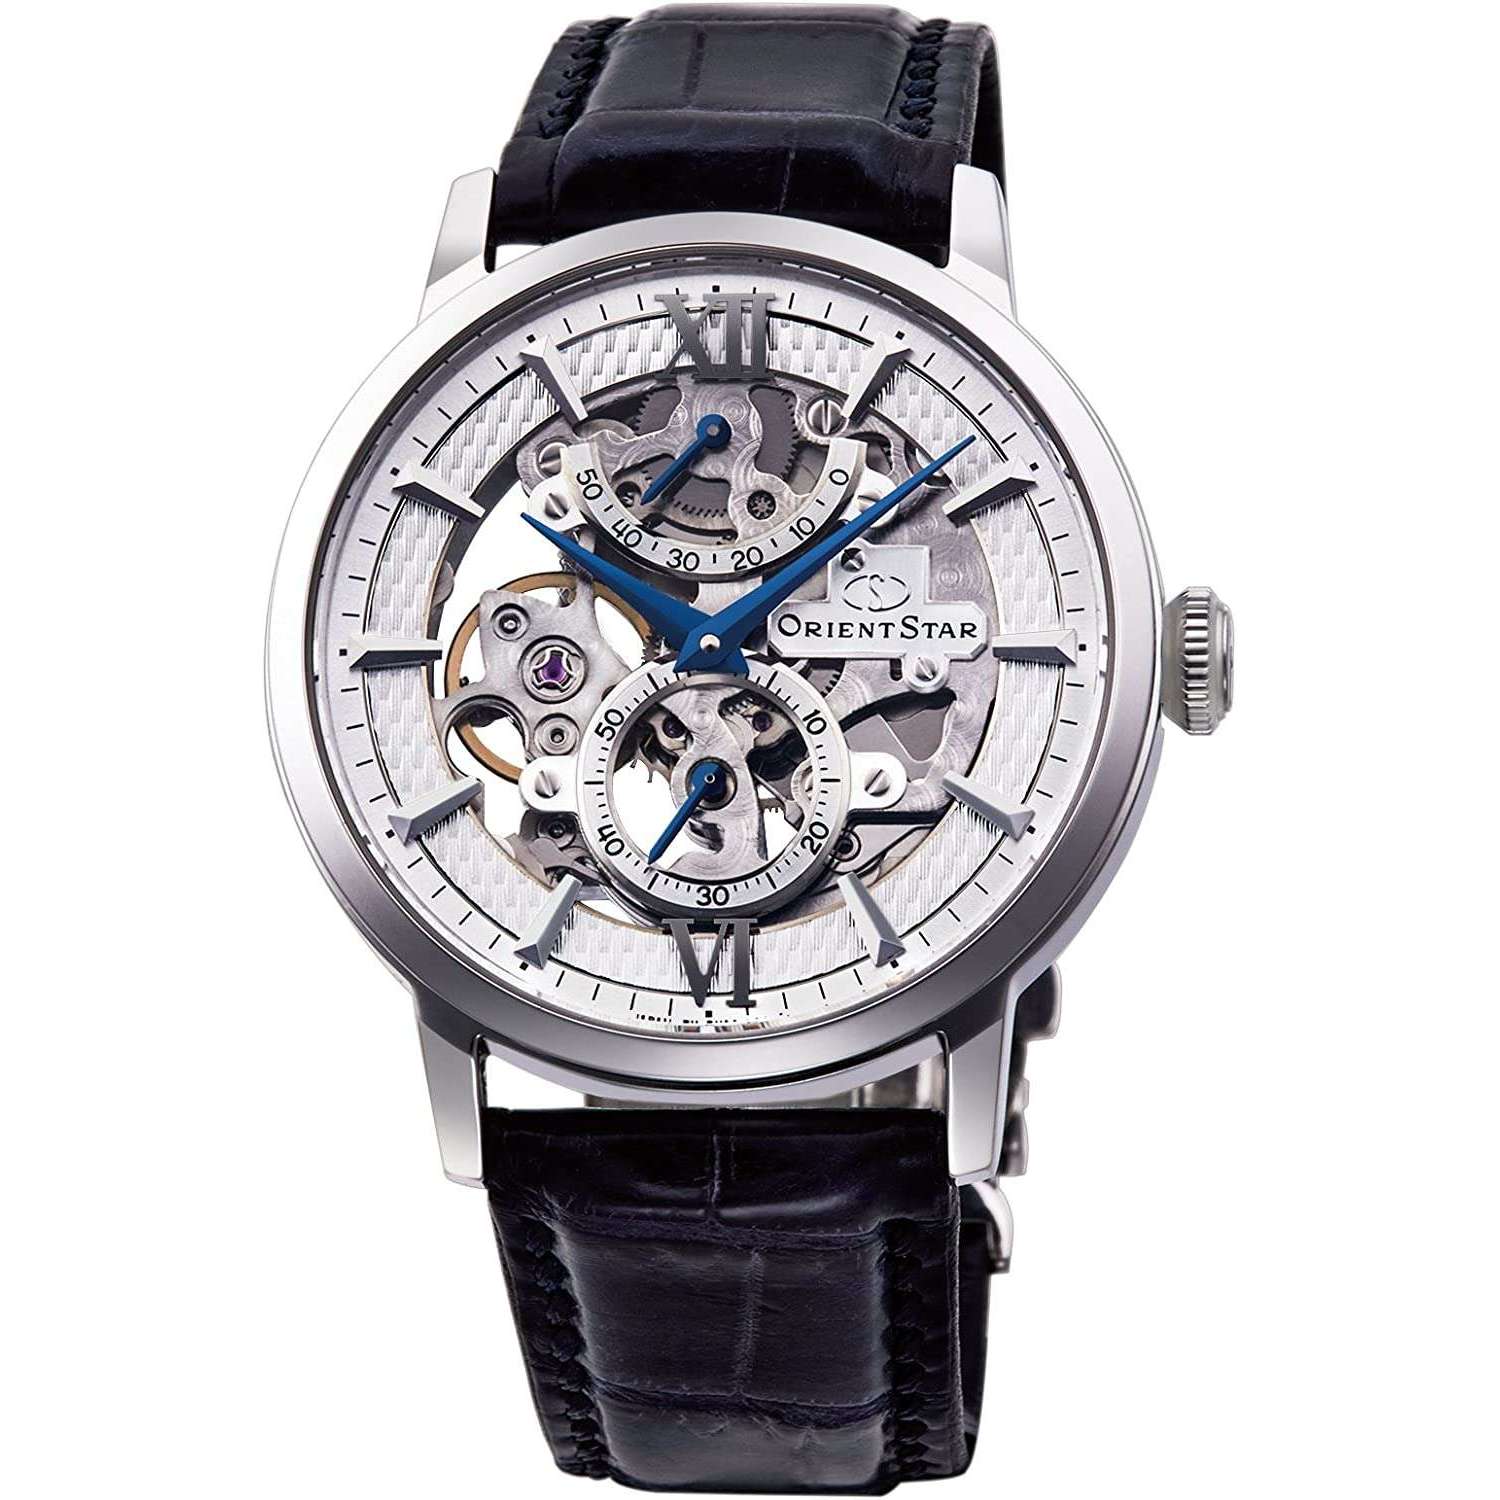 ORIENT STAR CLASSIC COLLECTION SKELETON MEN WATCH RK-DX0001S - ROOK JAPAN